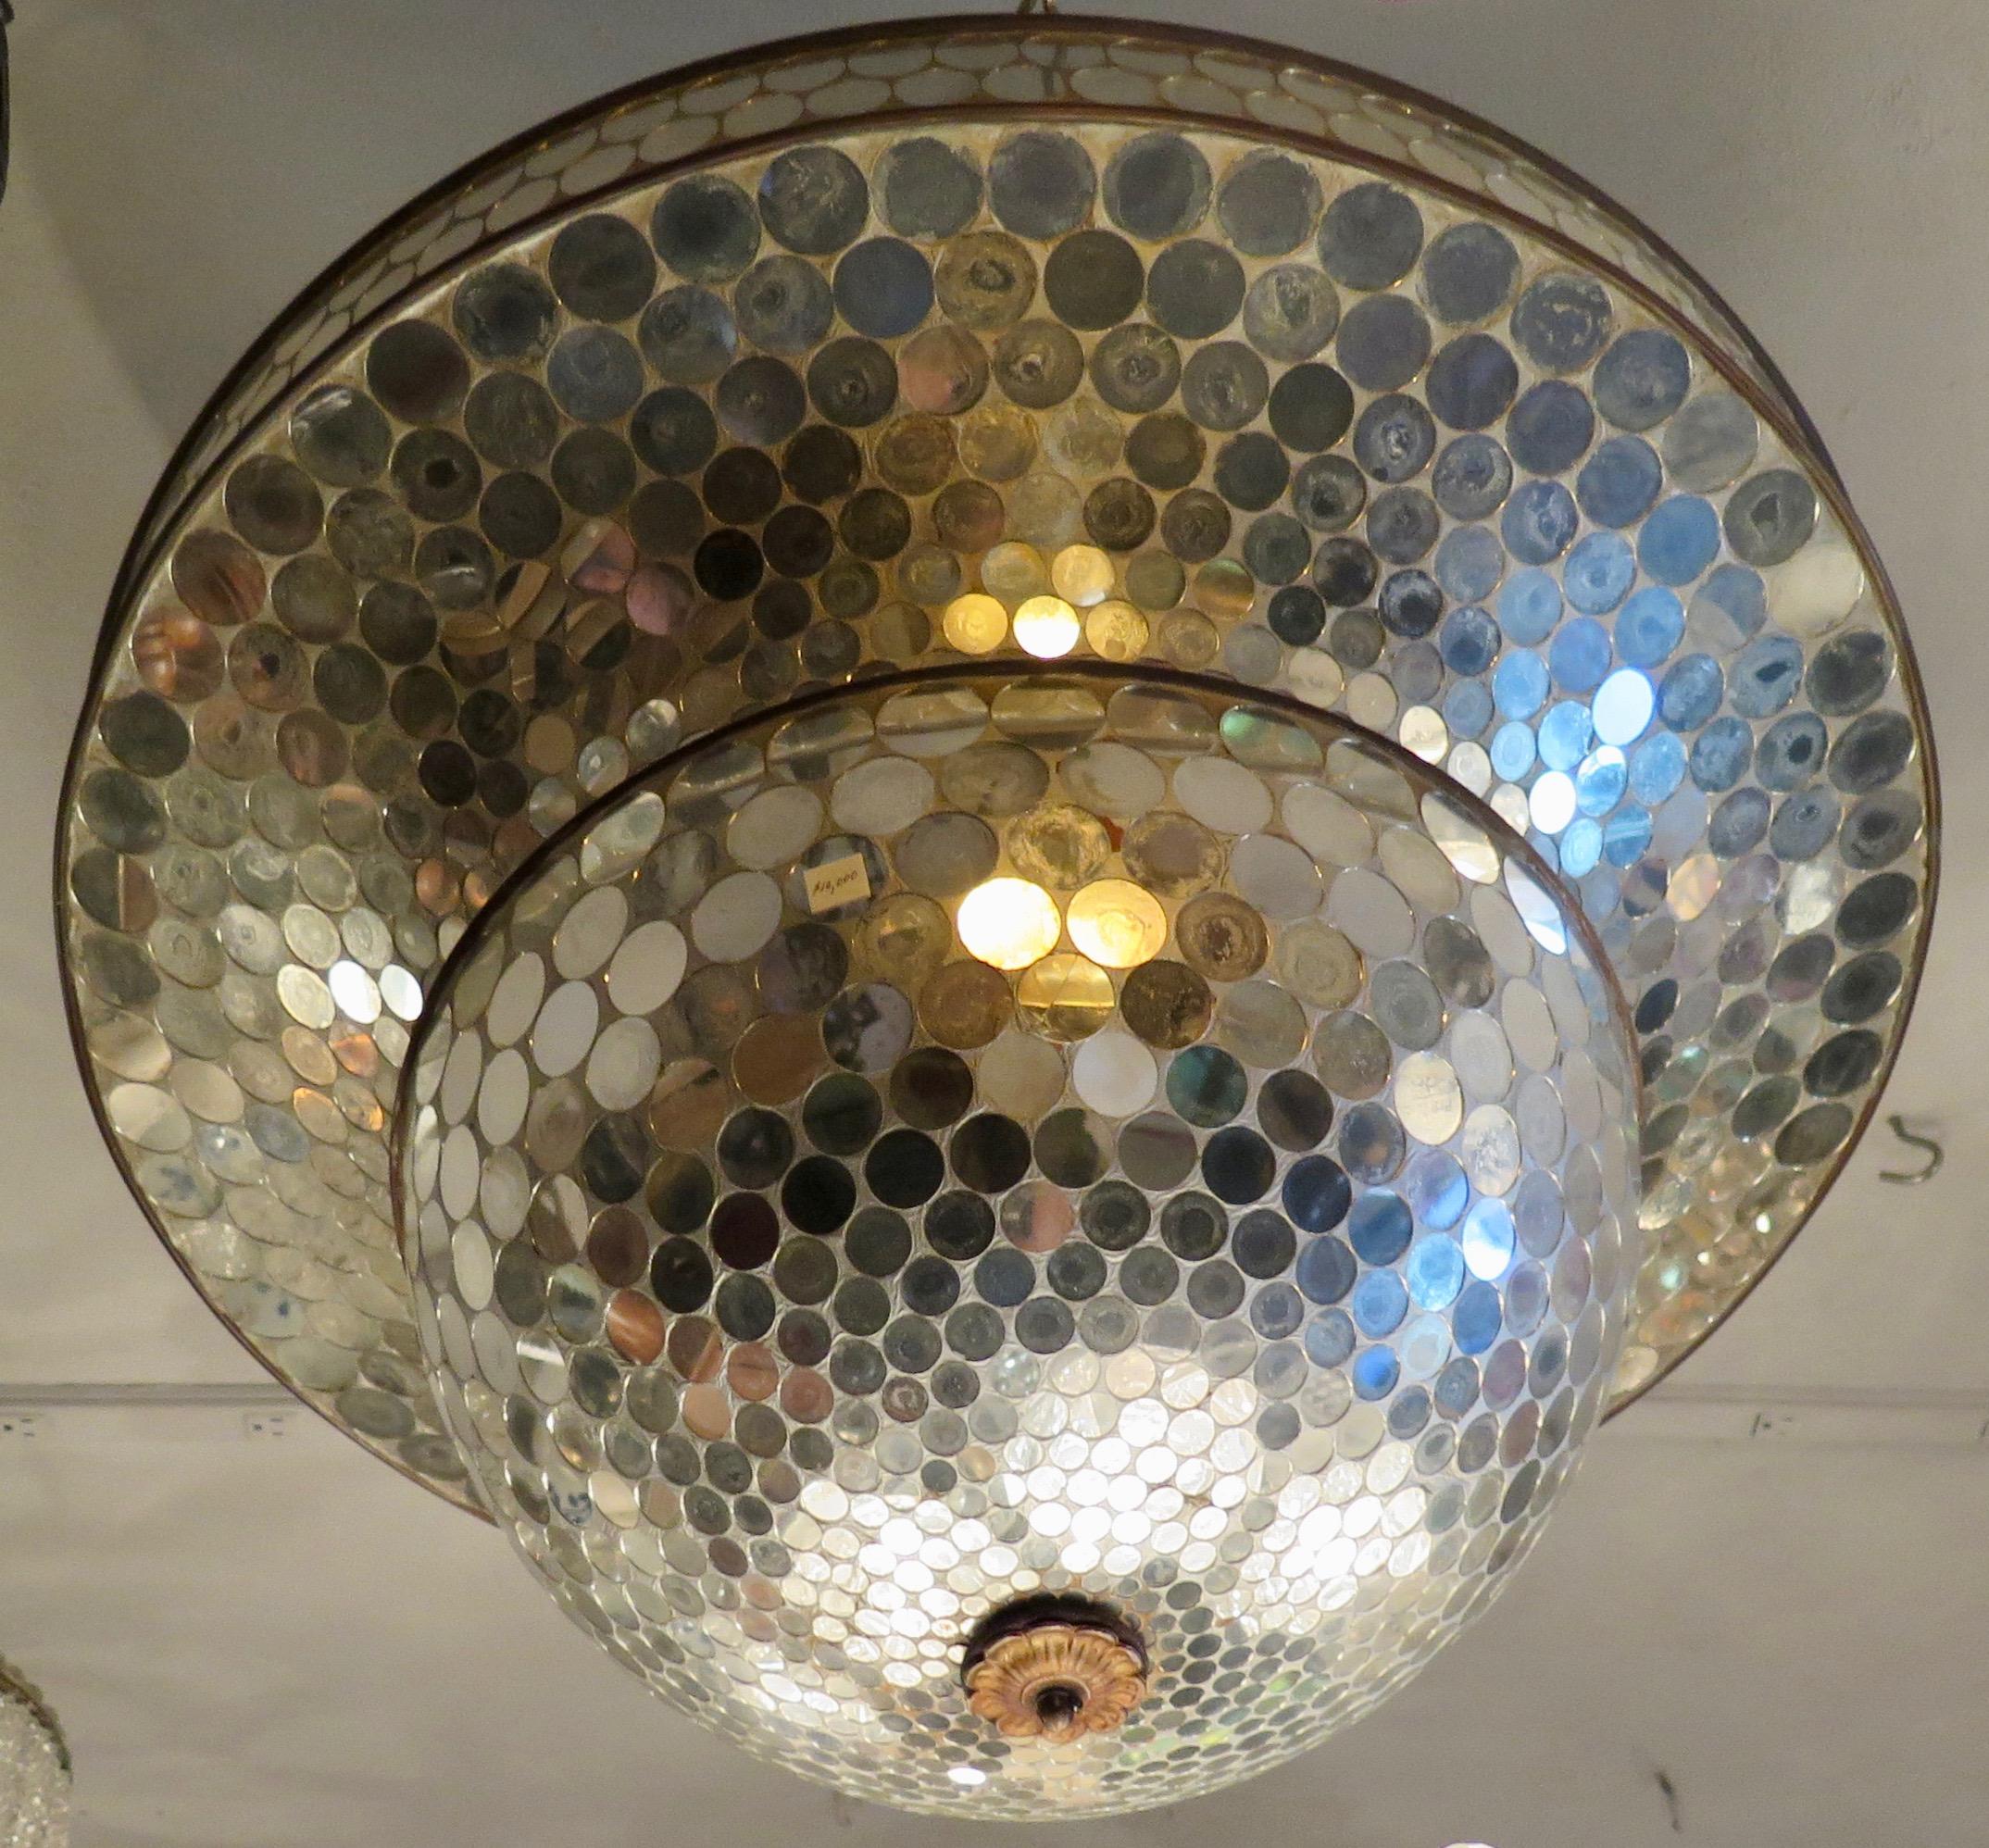 This early 20th century collectable ceiling fixture has a tiered circular dome form. Each tier of the dome is decorated with small, round, mirrored discs that cover the entire surface of the fixture. When illuminated by external light sources, a